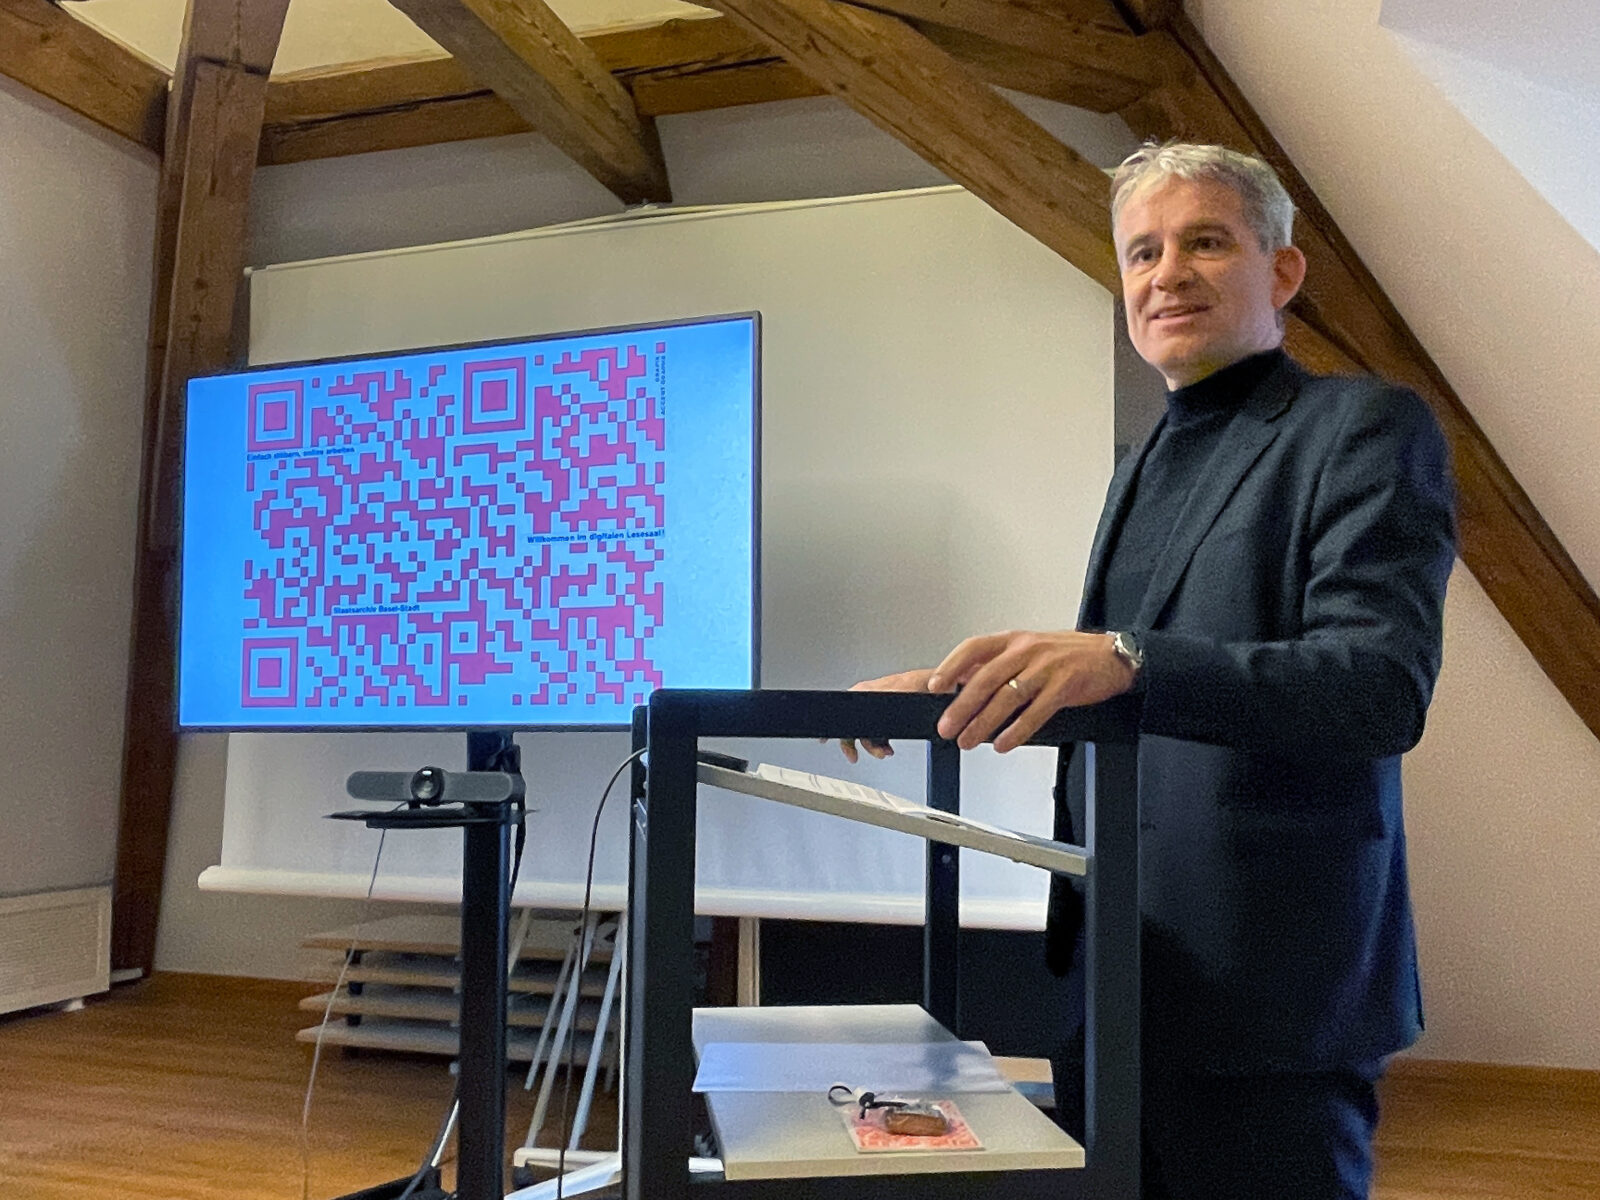 Beat Jans, President and Head of the Presidential Department Canon Basel-Stadt speeches during the launch of the Digitaler Lesesaal of State Archive of Canton Basel-Stadt and Canton St. Gallen.